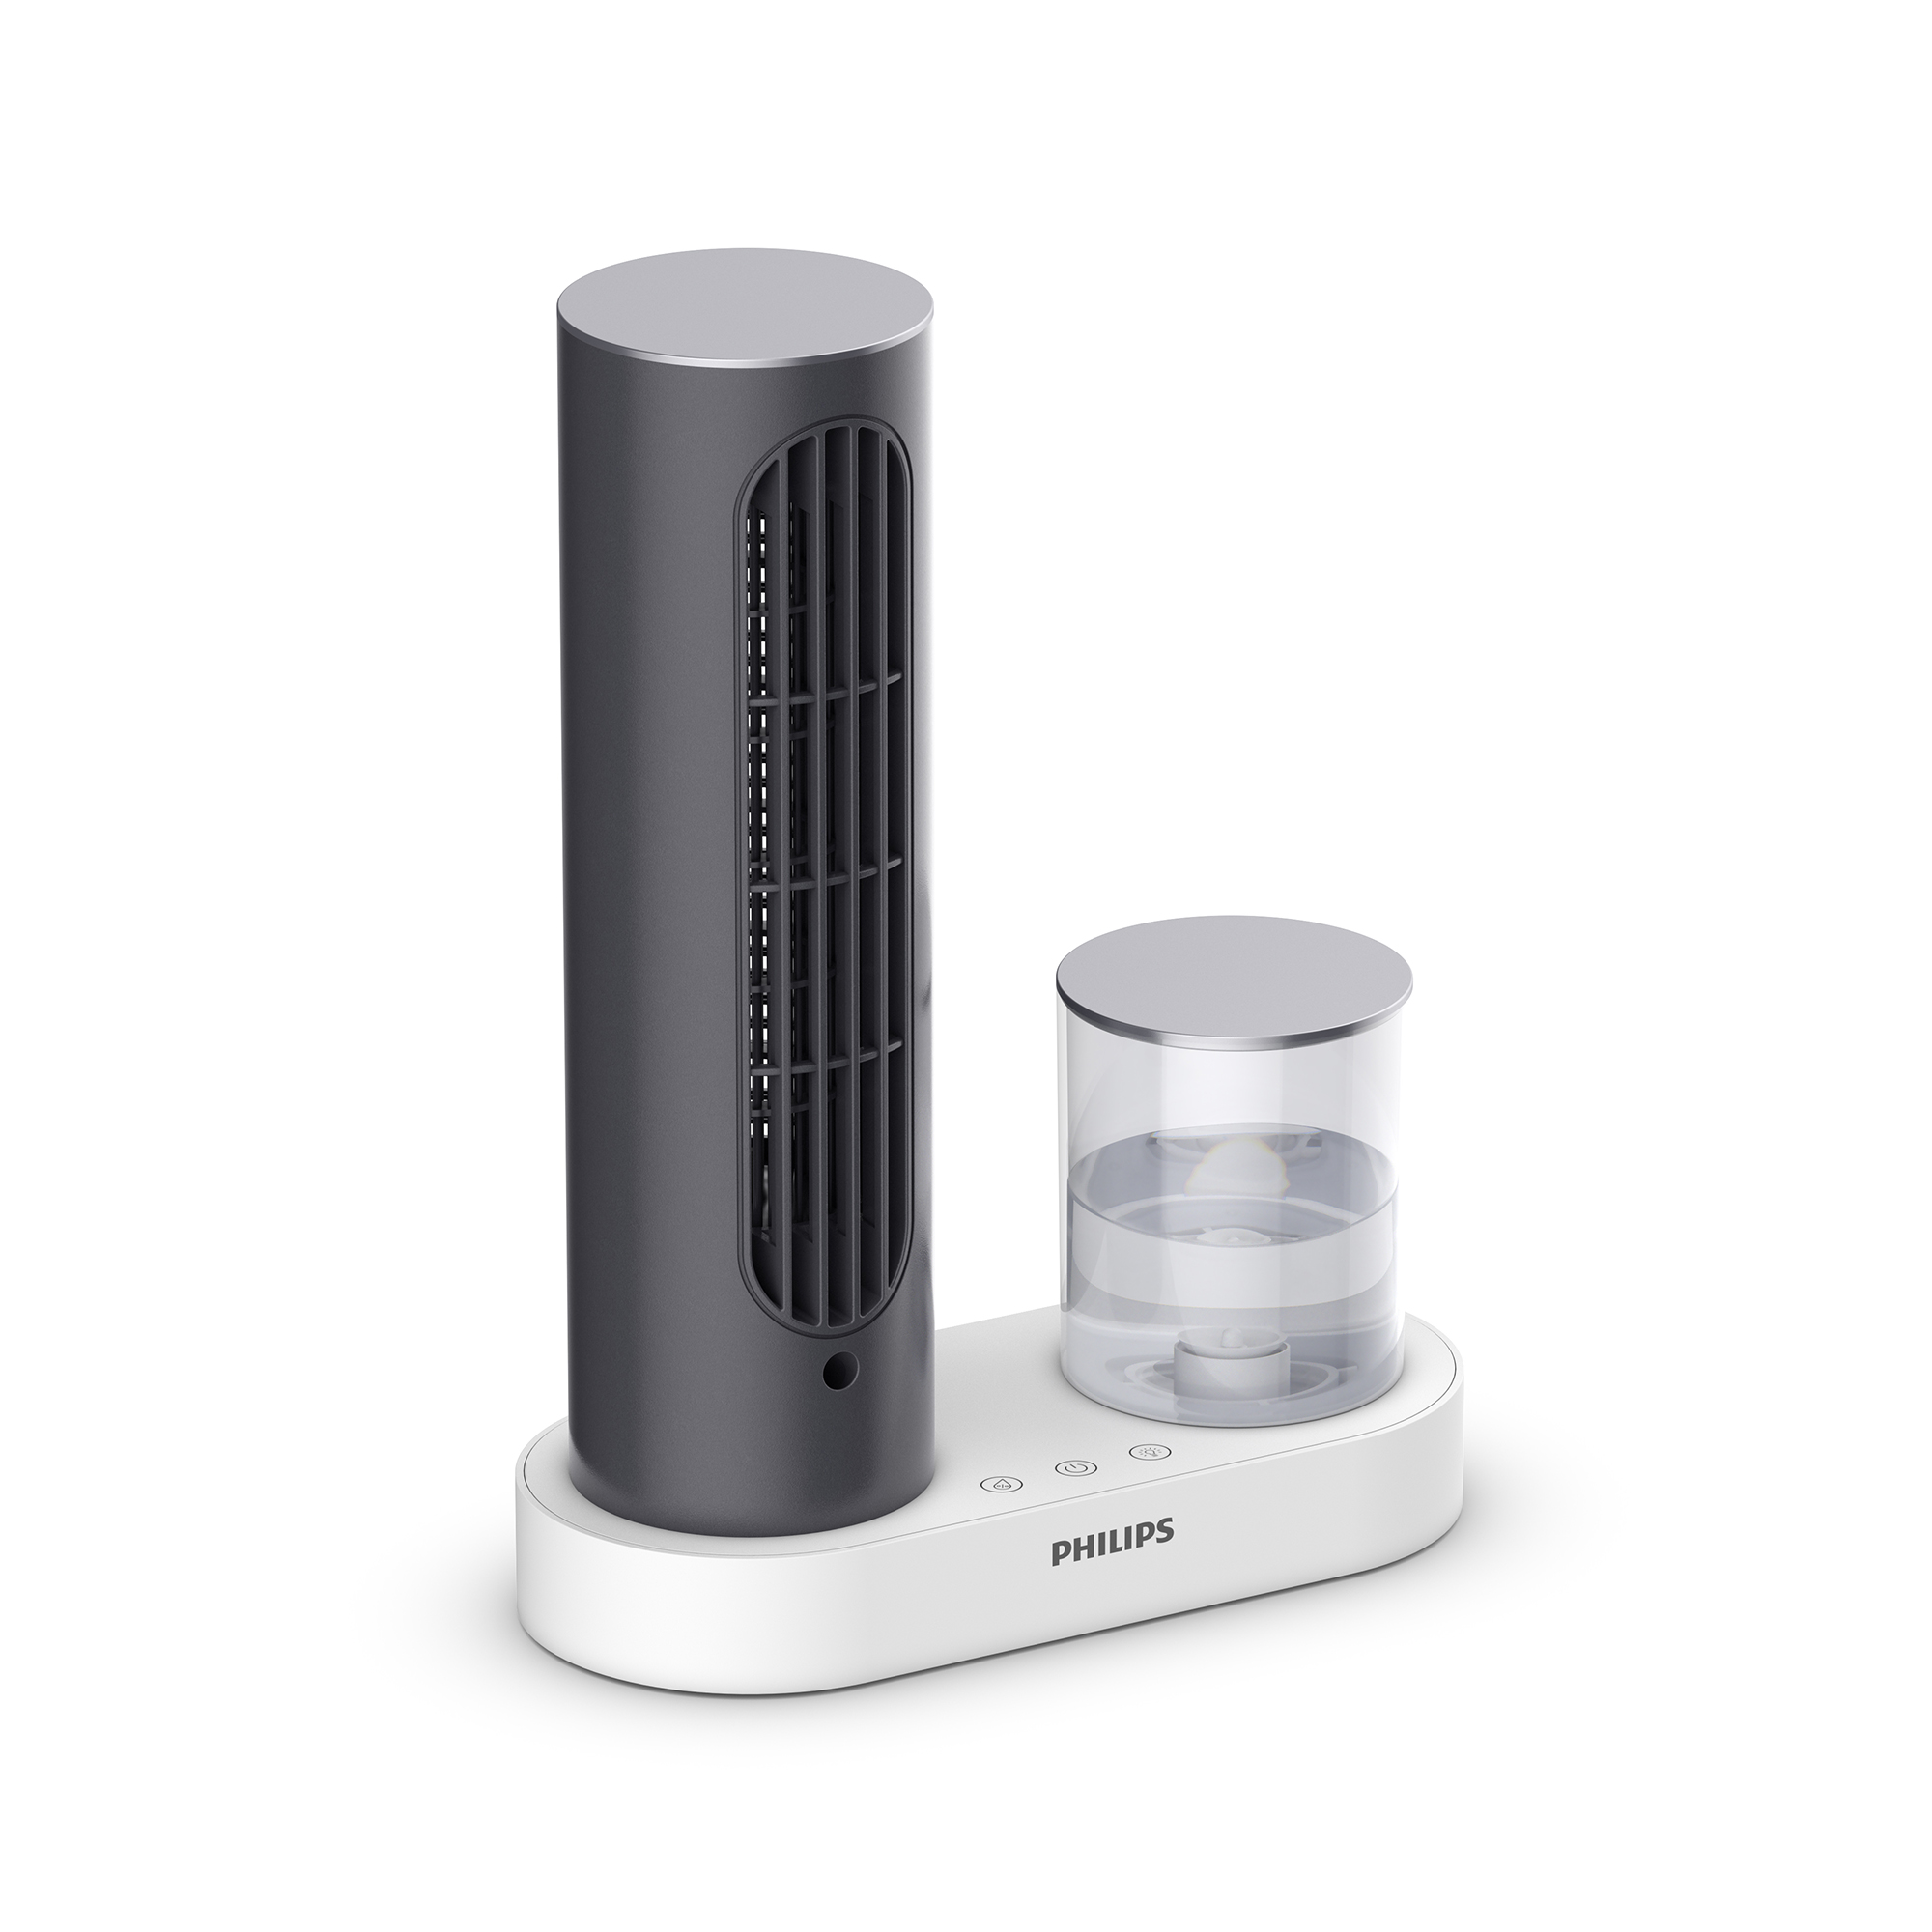 Philips Tower Fan Series 3000 - ACR3124TX